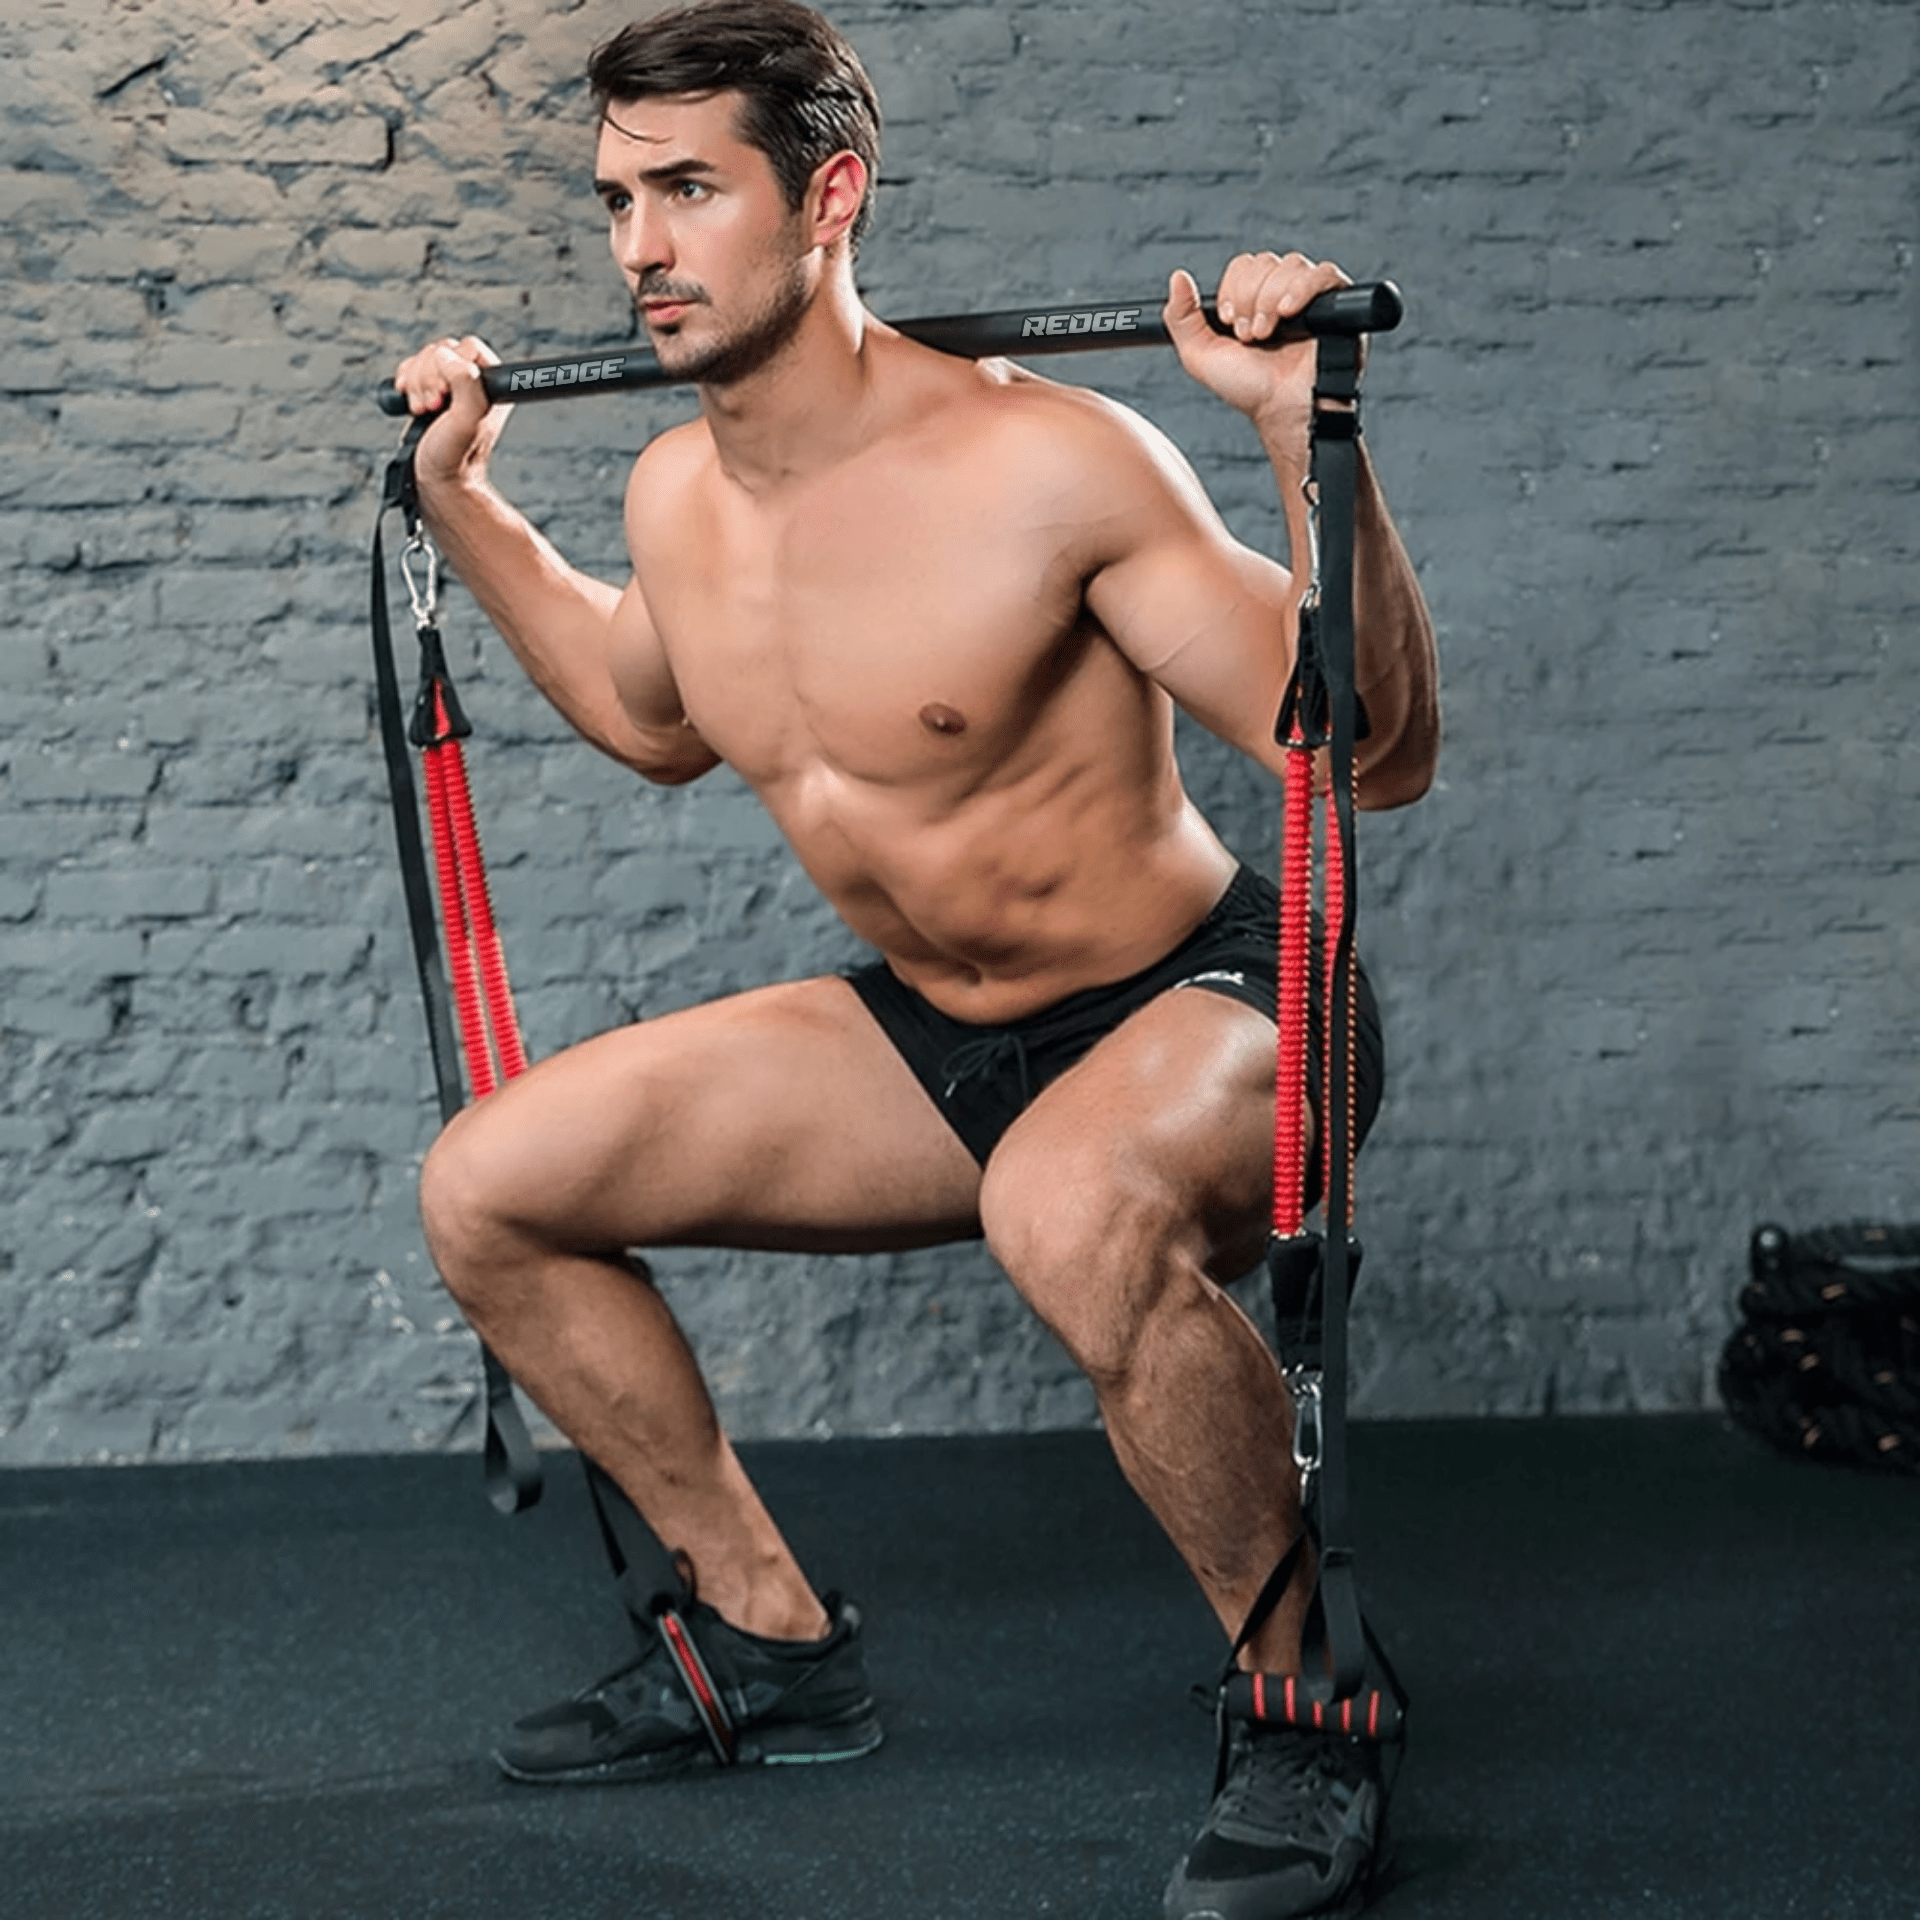 Man modeling the Redge Fit Portable Gym Machine Available at https://www.getredge.com/products/portable-gym-system